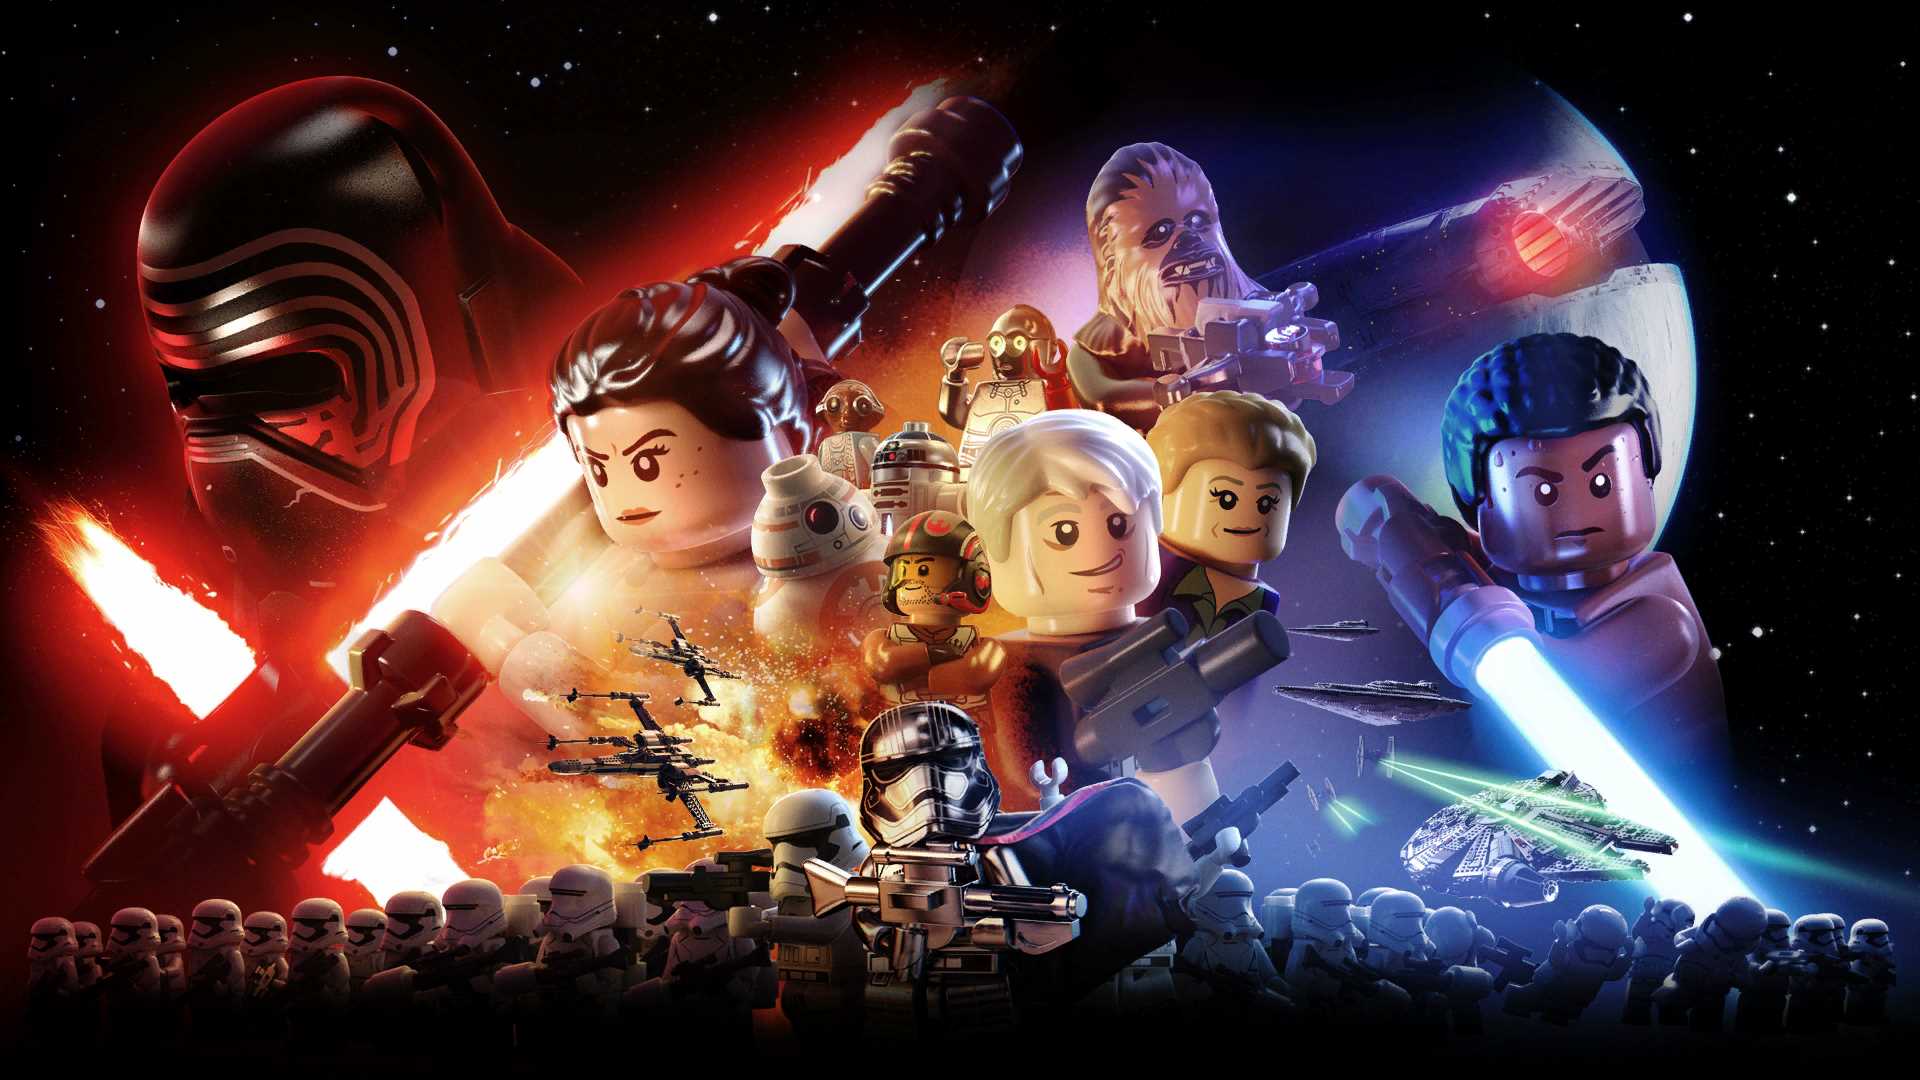 lego star wars remastered ps4